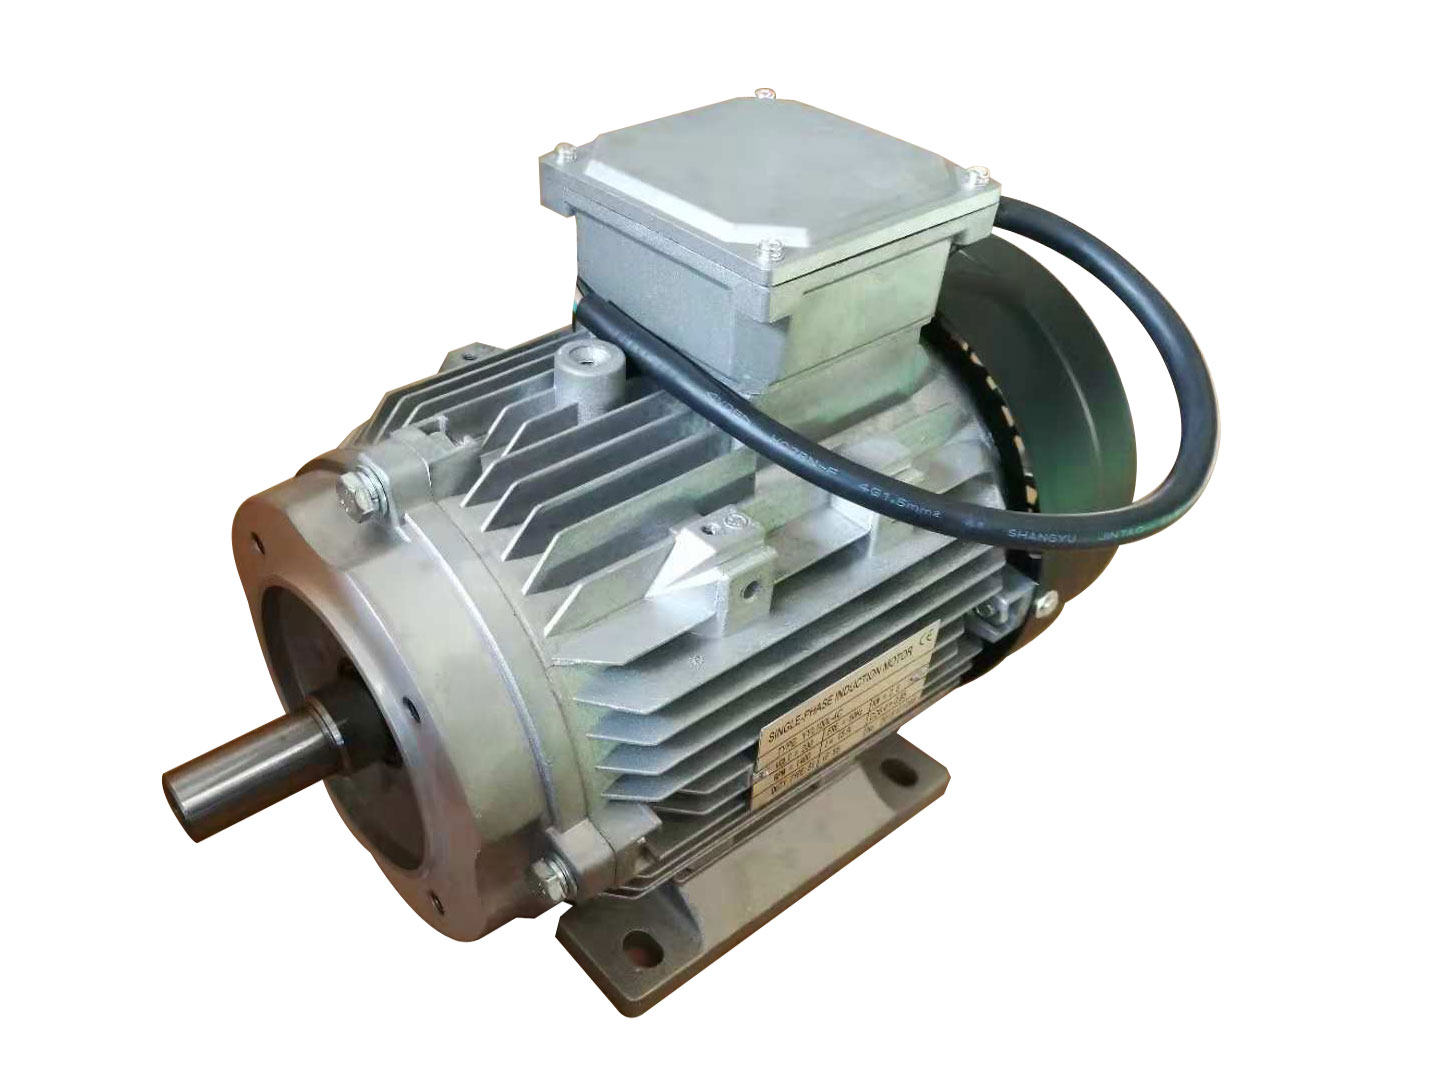 3 KW Mobile High Pressure Washer Motor